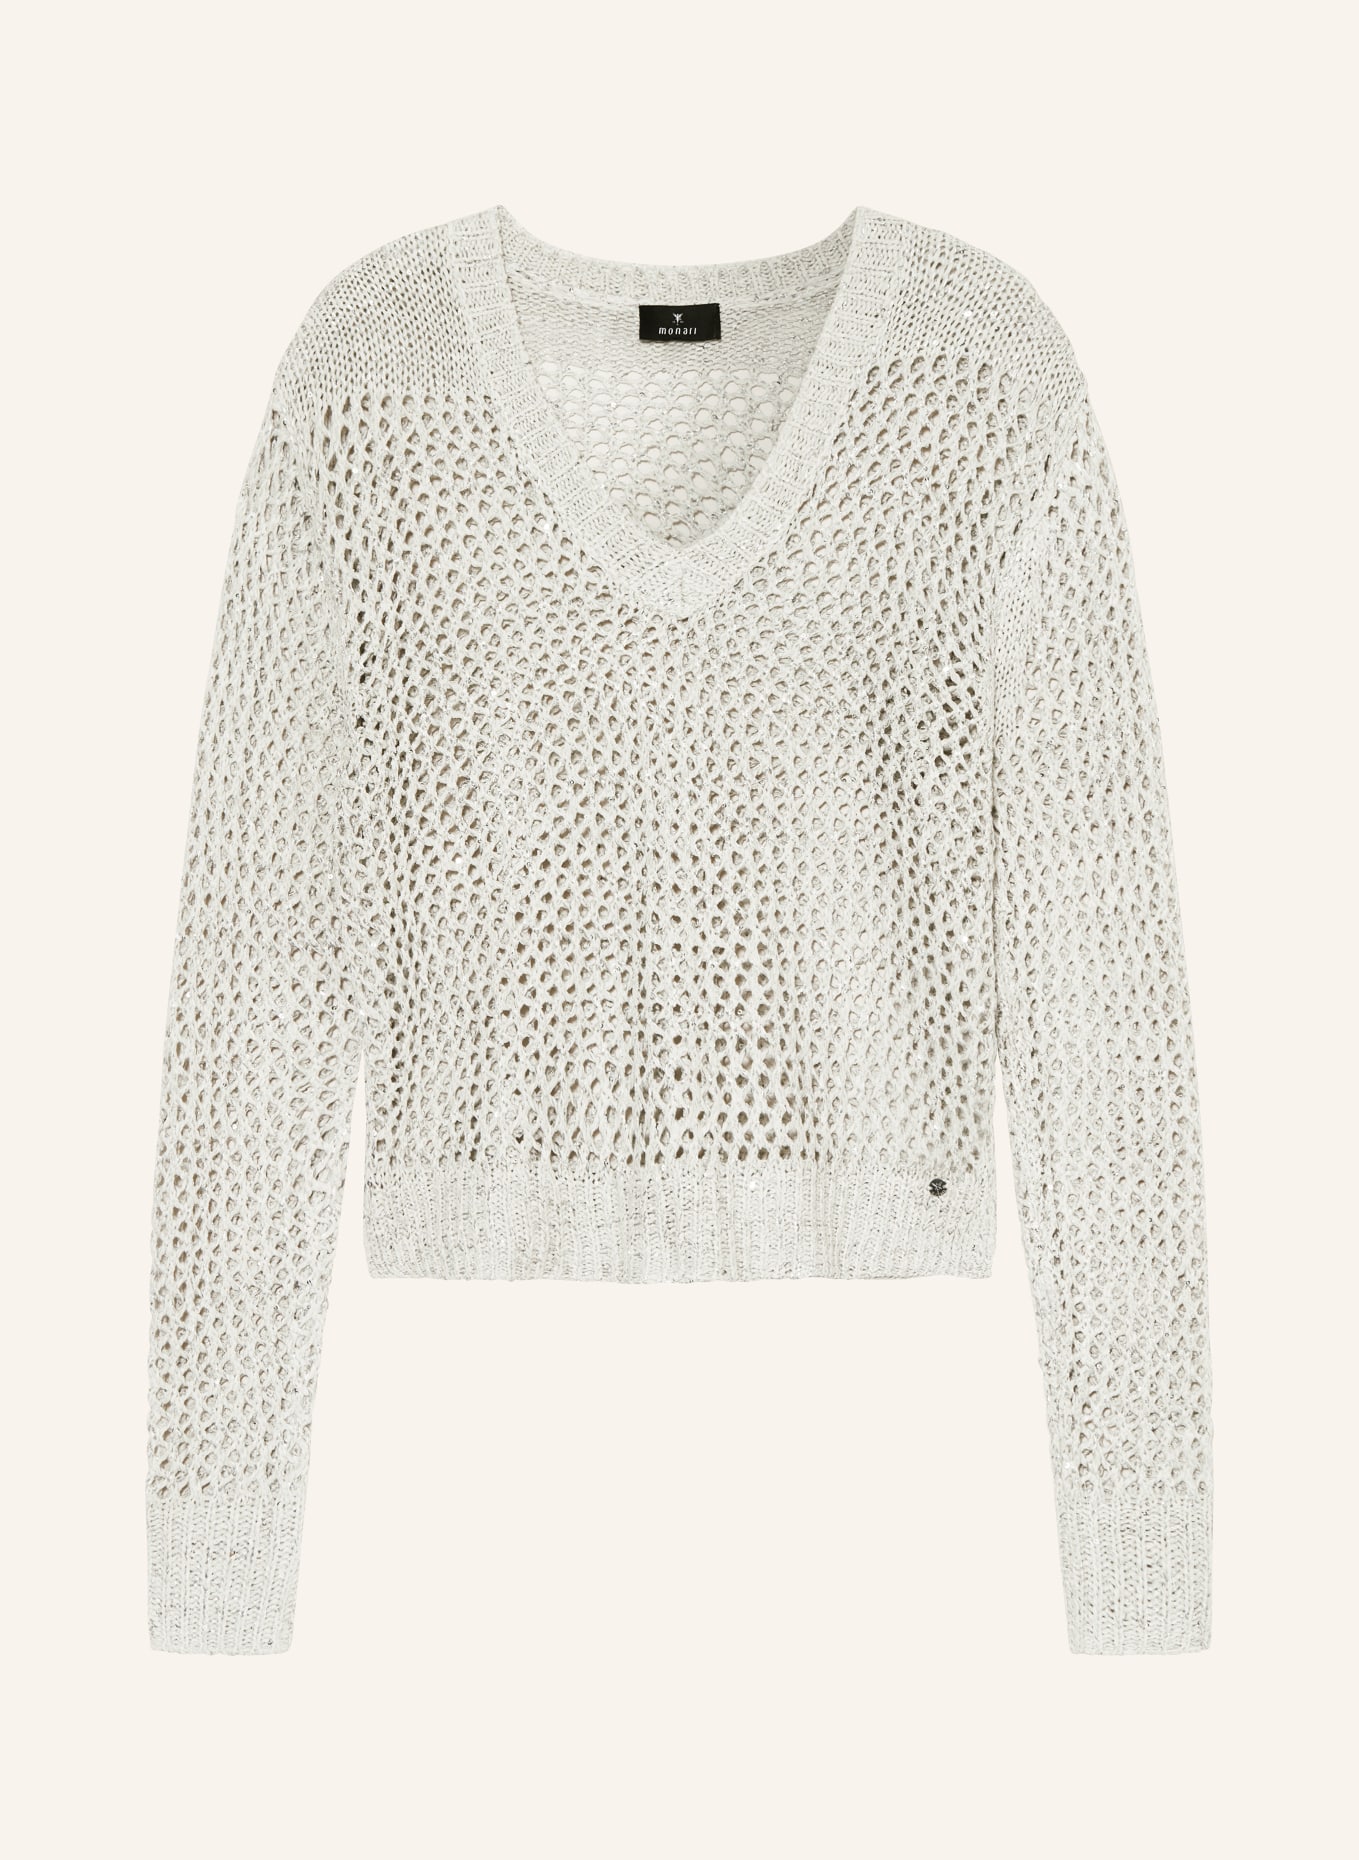 monari Sweater with sequins, Color: LIGHT GRAY (Image 1)